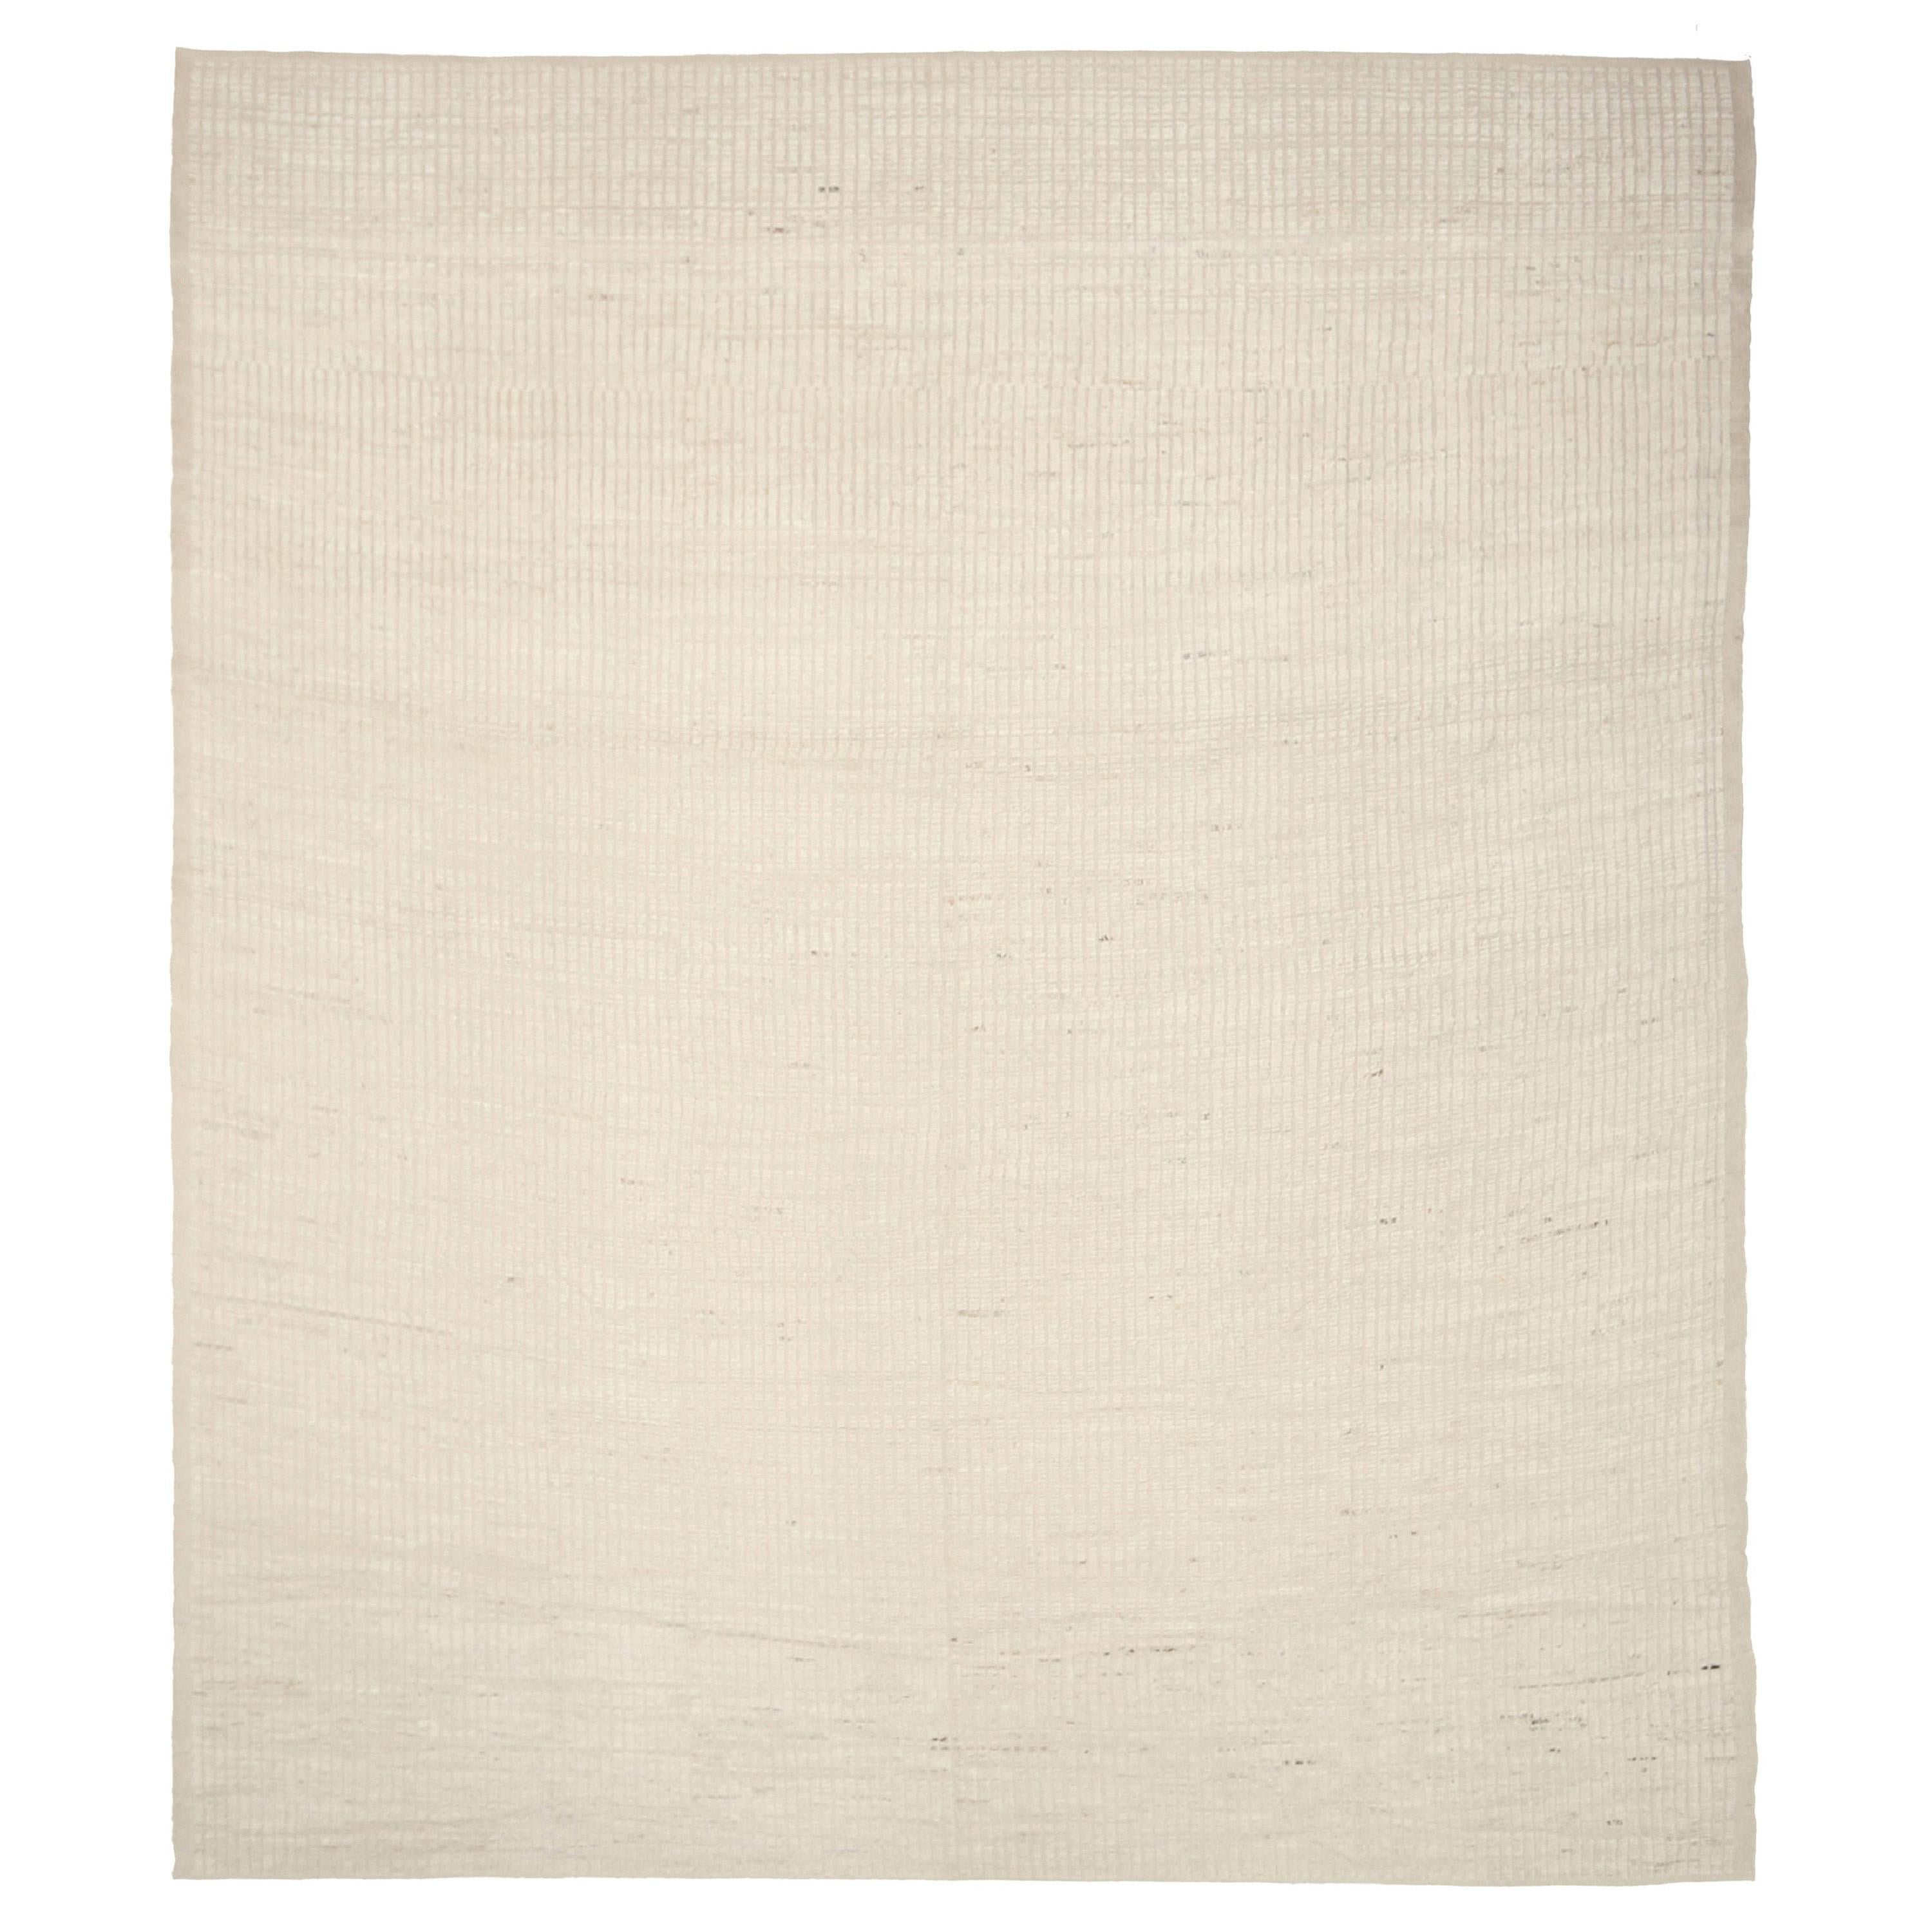 Nazmiyal Collection Solid Ivory Modern Distressed Rug. 13 ft 7 in x 15 ft 8 in